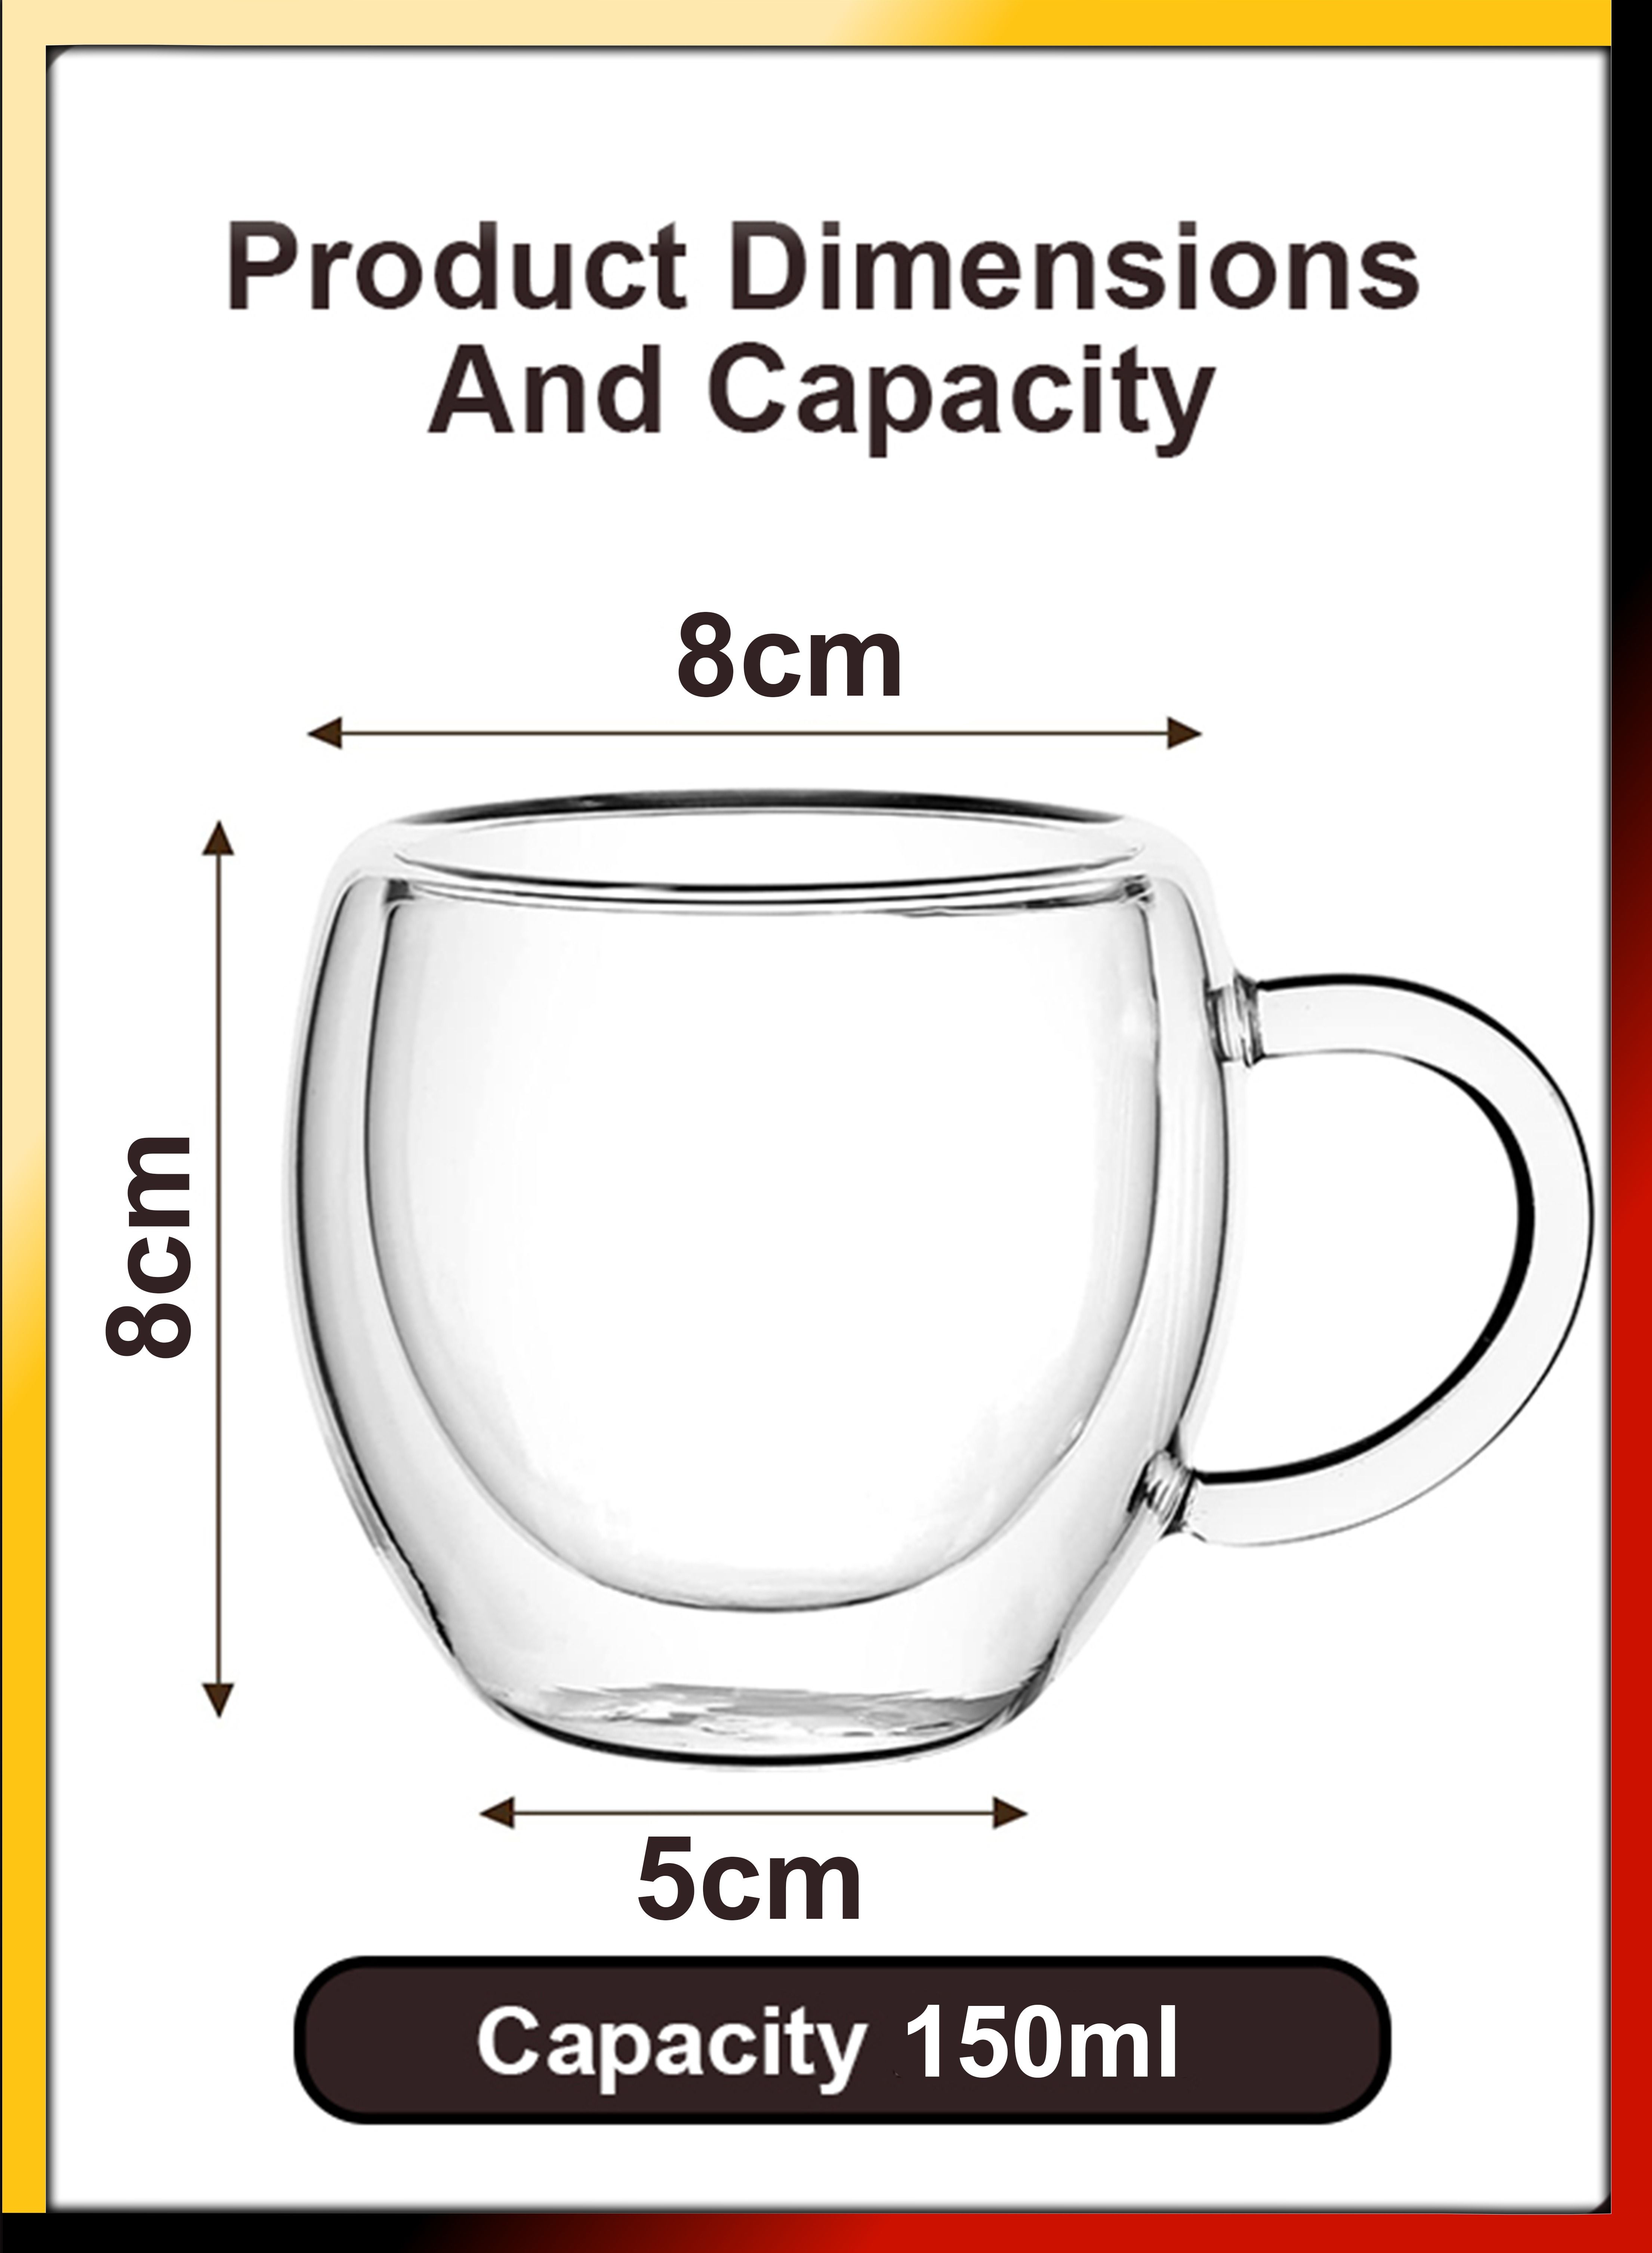 Pack Of 6 Insulated Double Wall Cups With Handle Espresso Latte Cappuccino Shot Glasses Clear Tea Coffee Mugs 150ml For Hot And Cold Beverages 